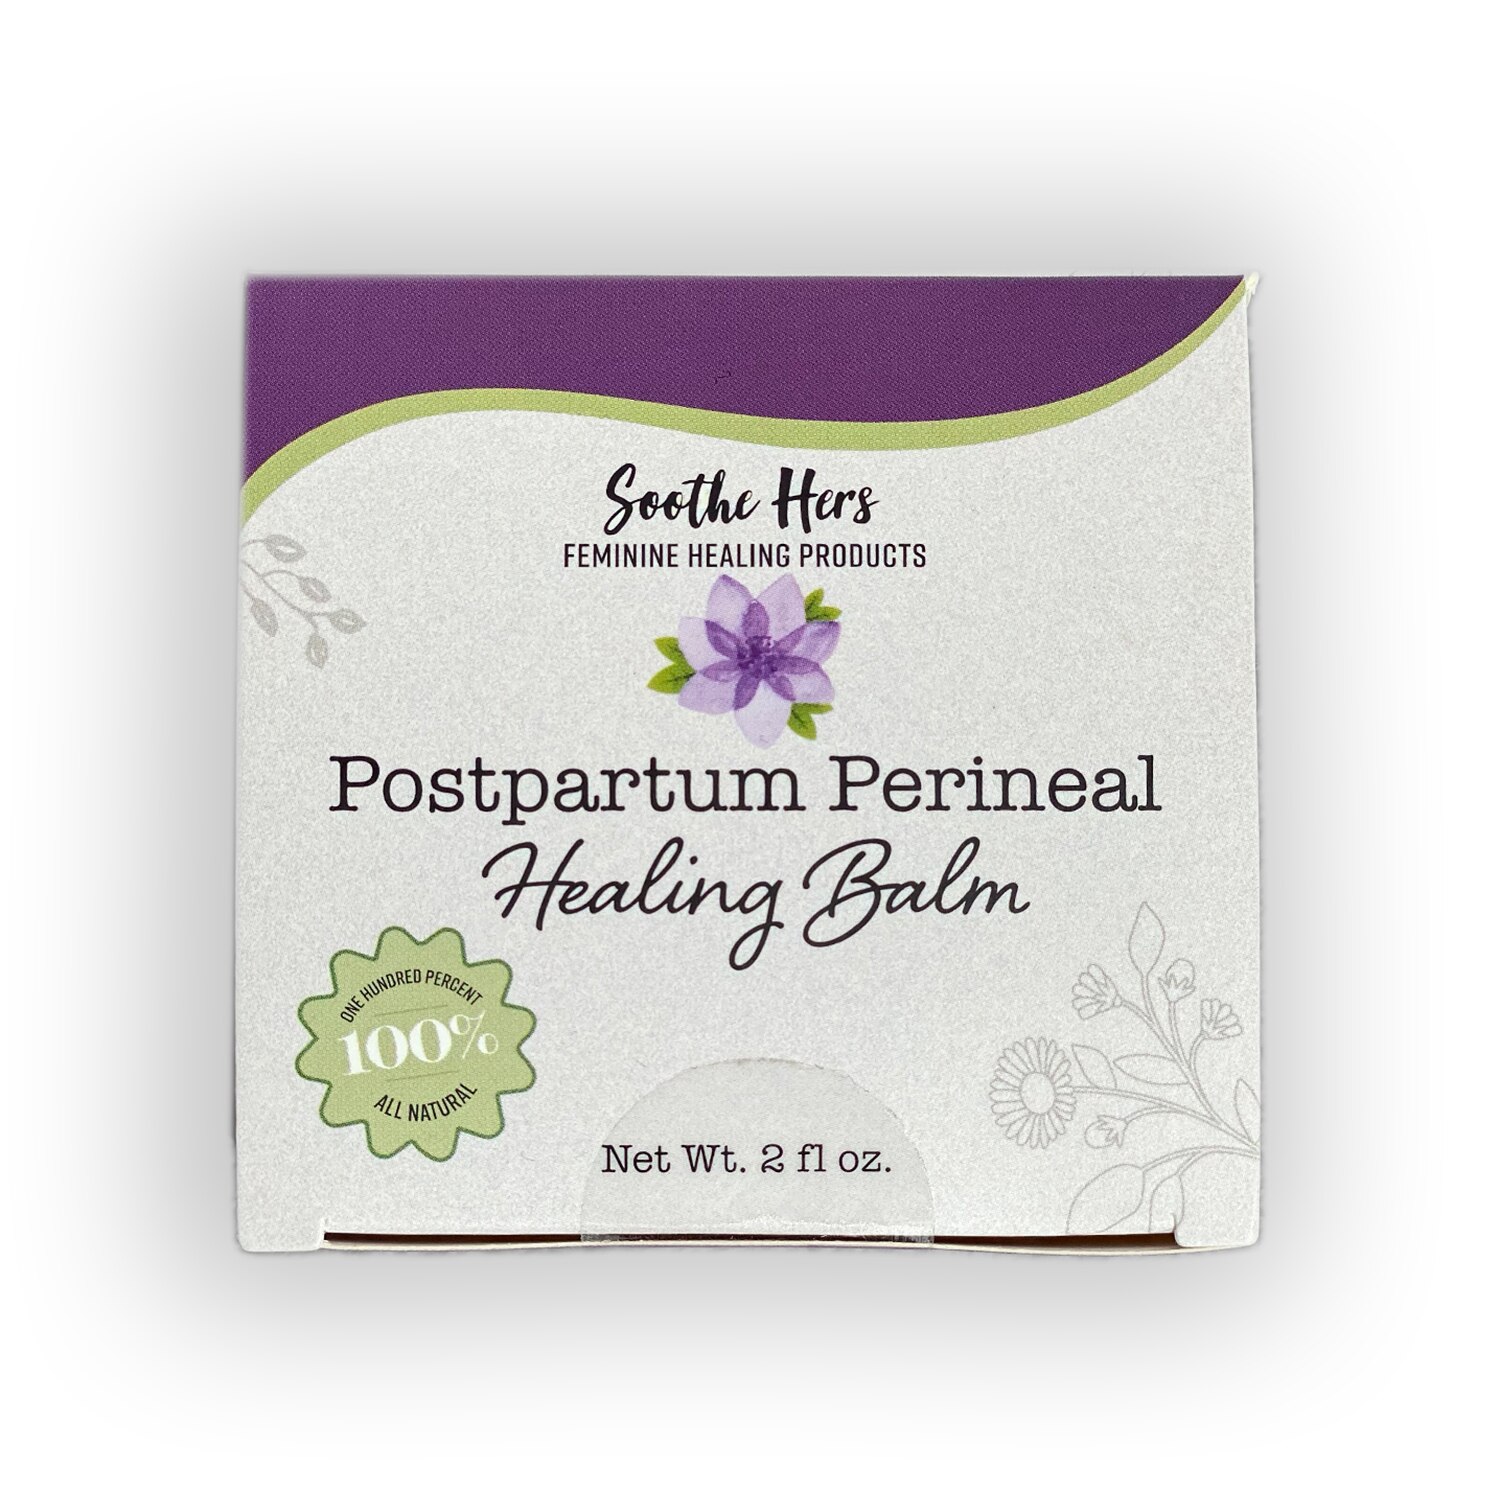 Soothe Hers Postpartum Healing Balm | All Natural Salve | Cooling Relief for Moms, 2 oz